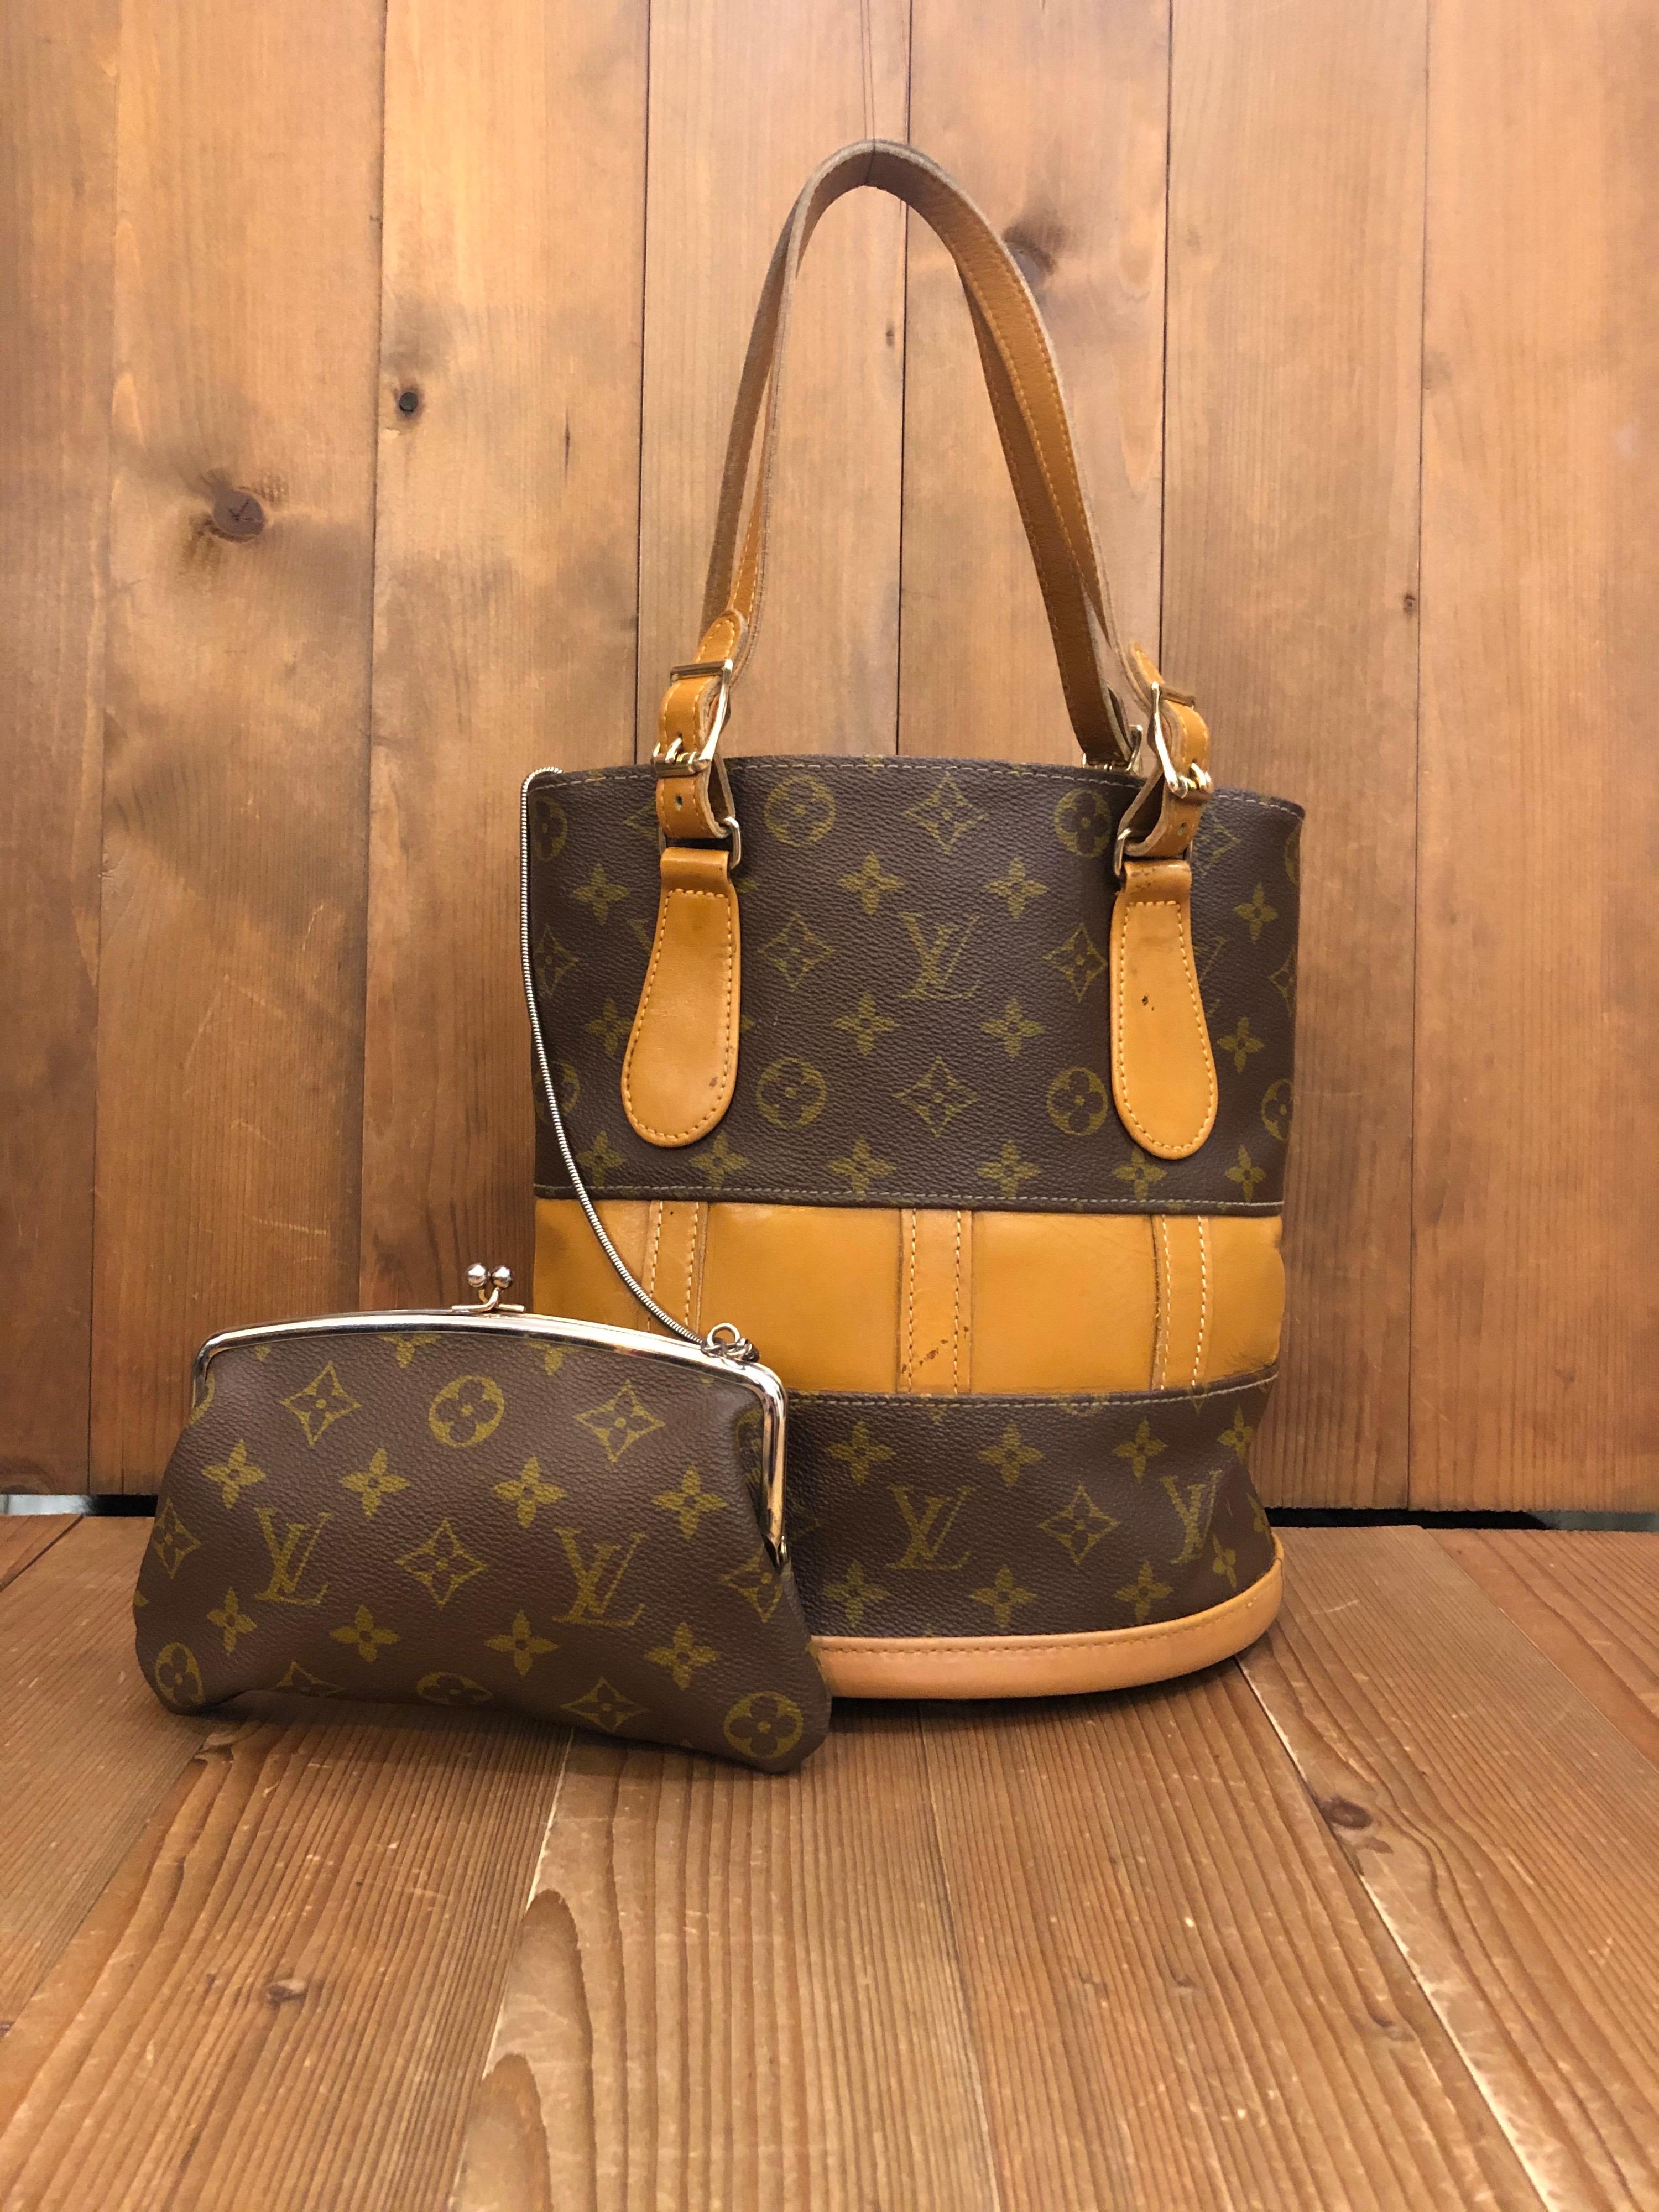 Back in 1970’s, Louis Vuitton was really popular in the United States. All their factories had always been in France, but Louis Vuitton simply could not keep up with tits growing market in the US. For this reason, in the 1970’s Louis Vuitton